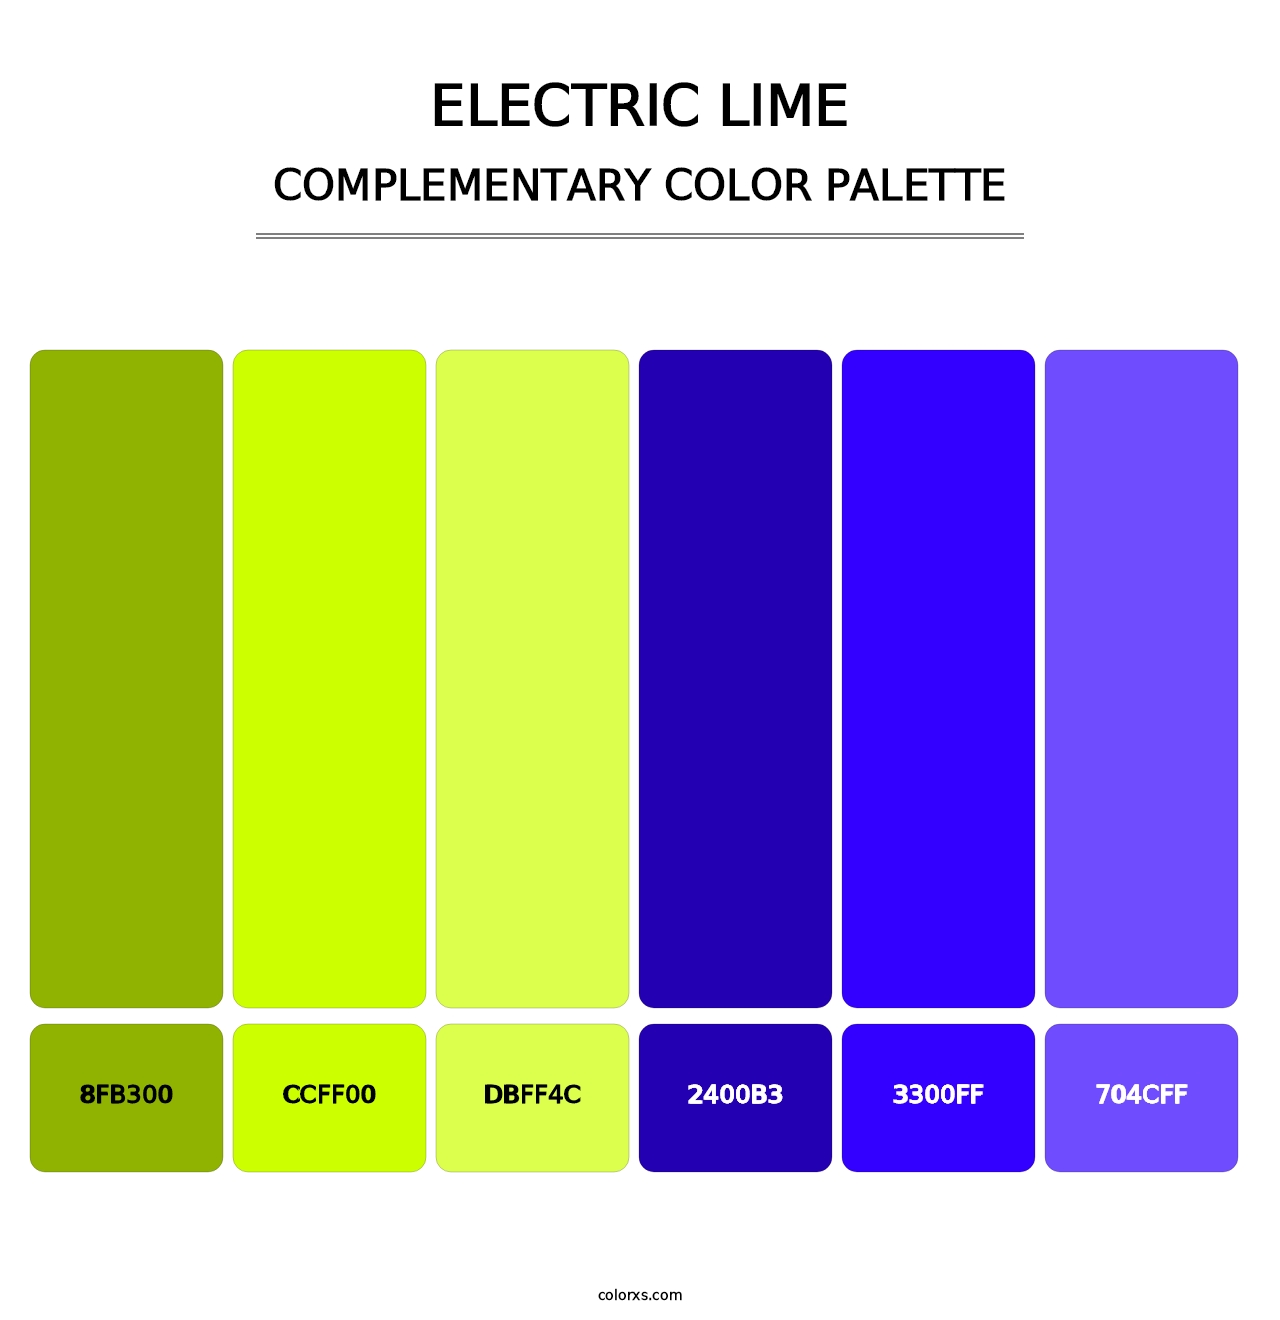 Electric Lime - Complementary Color Palette